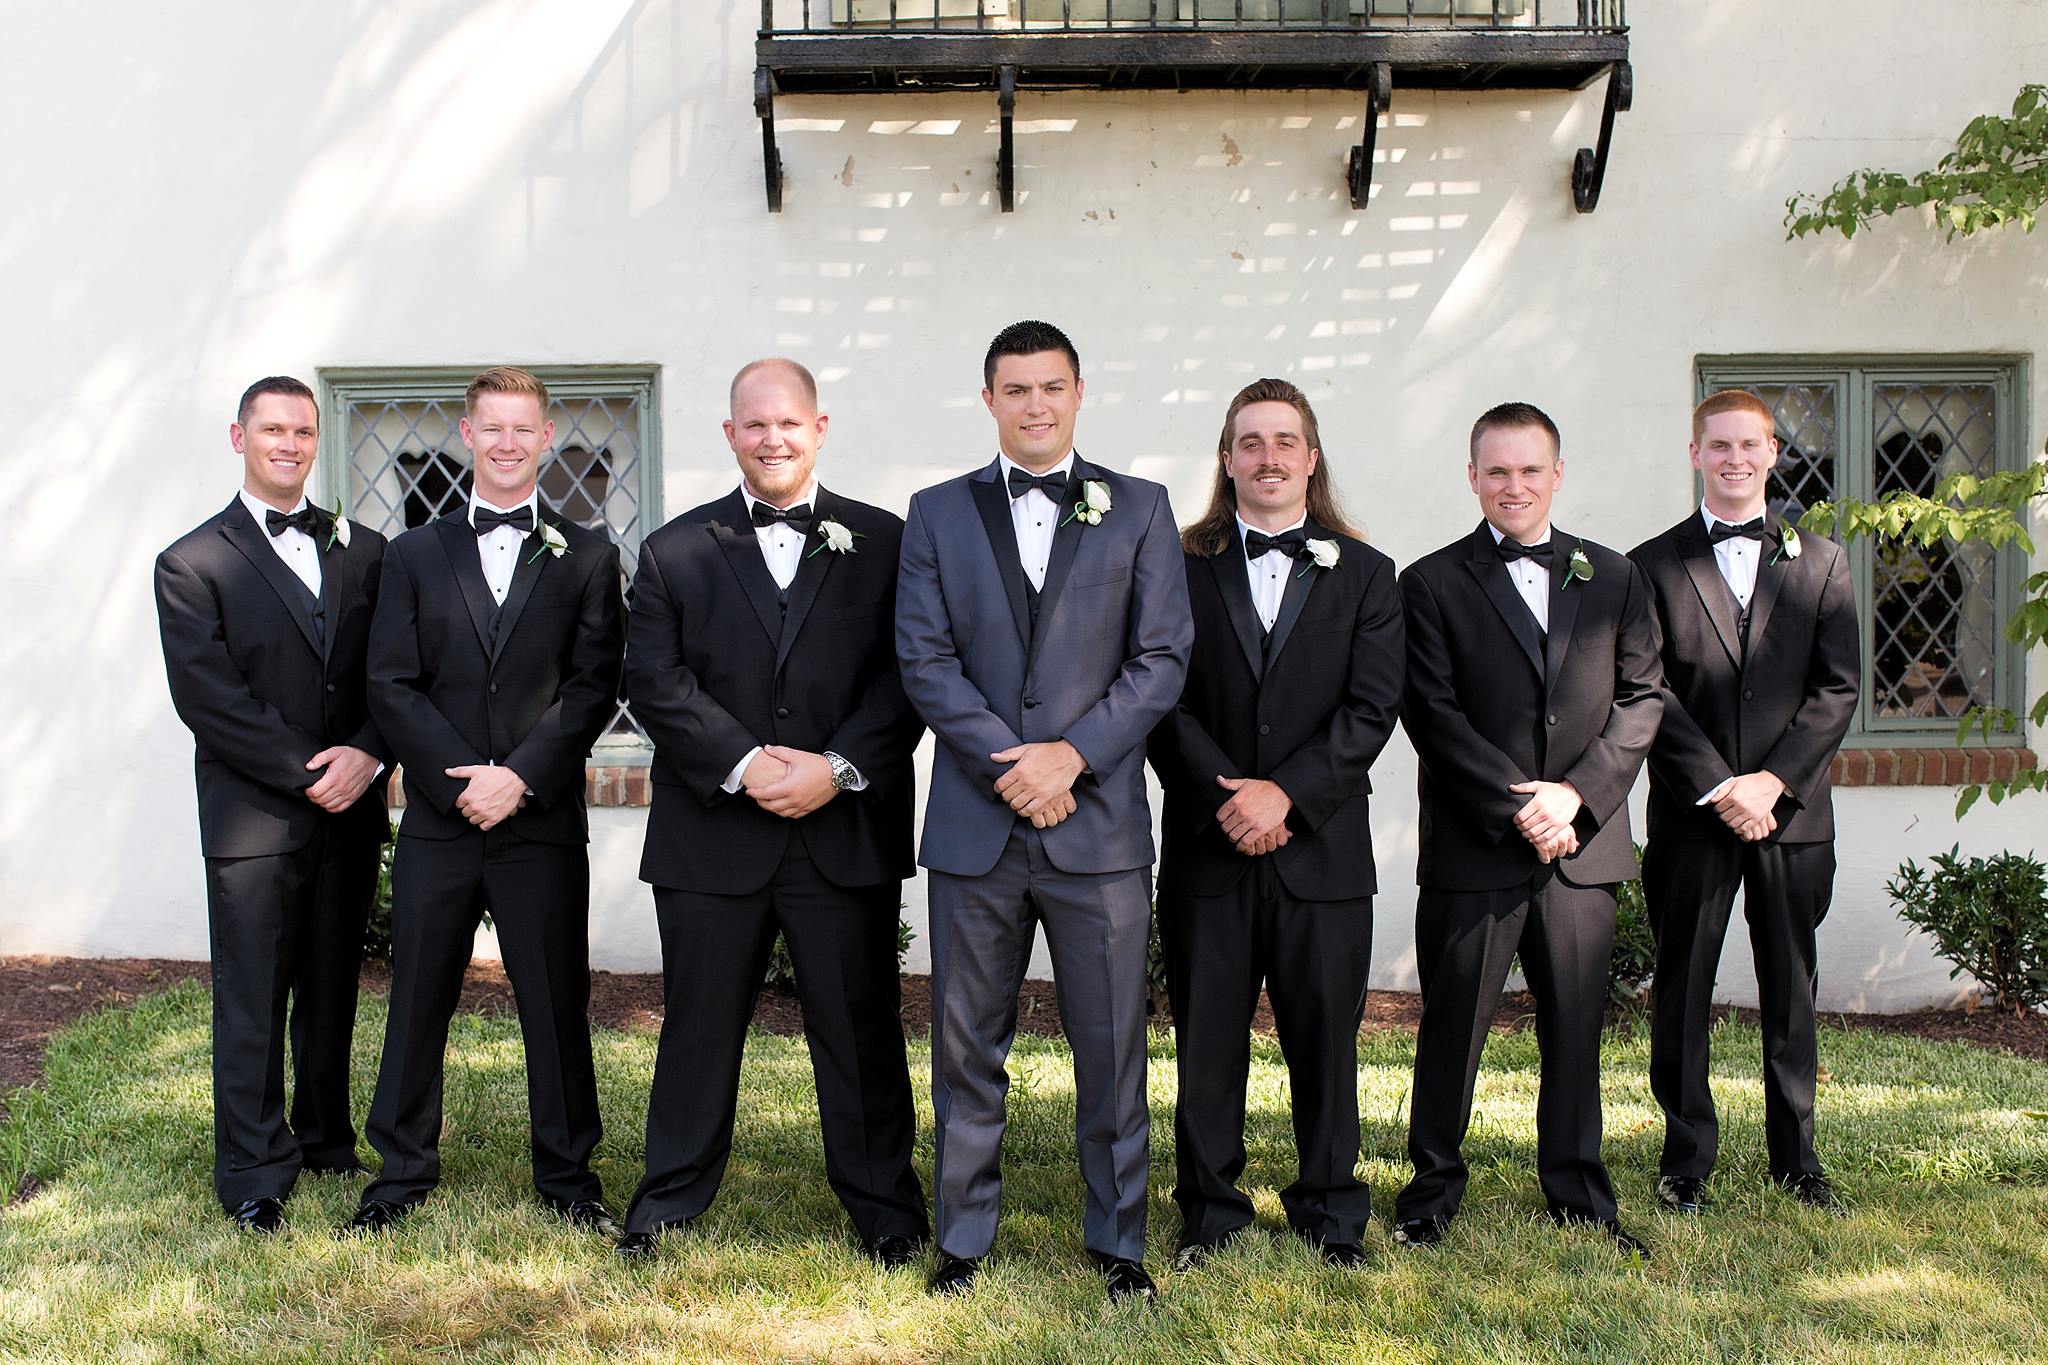 Ways to Make Your Groom Stand Out | Katherine Birkbeck www.kbirkbeckphotography.com